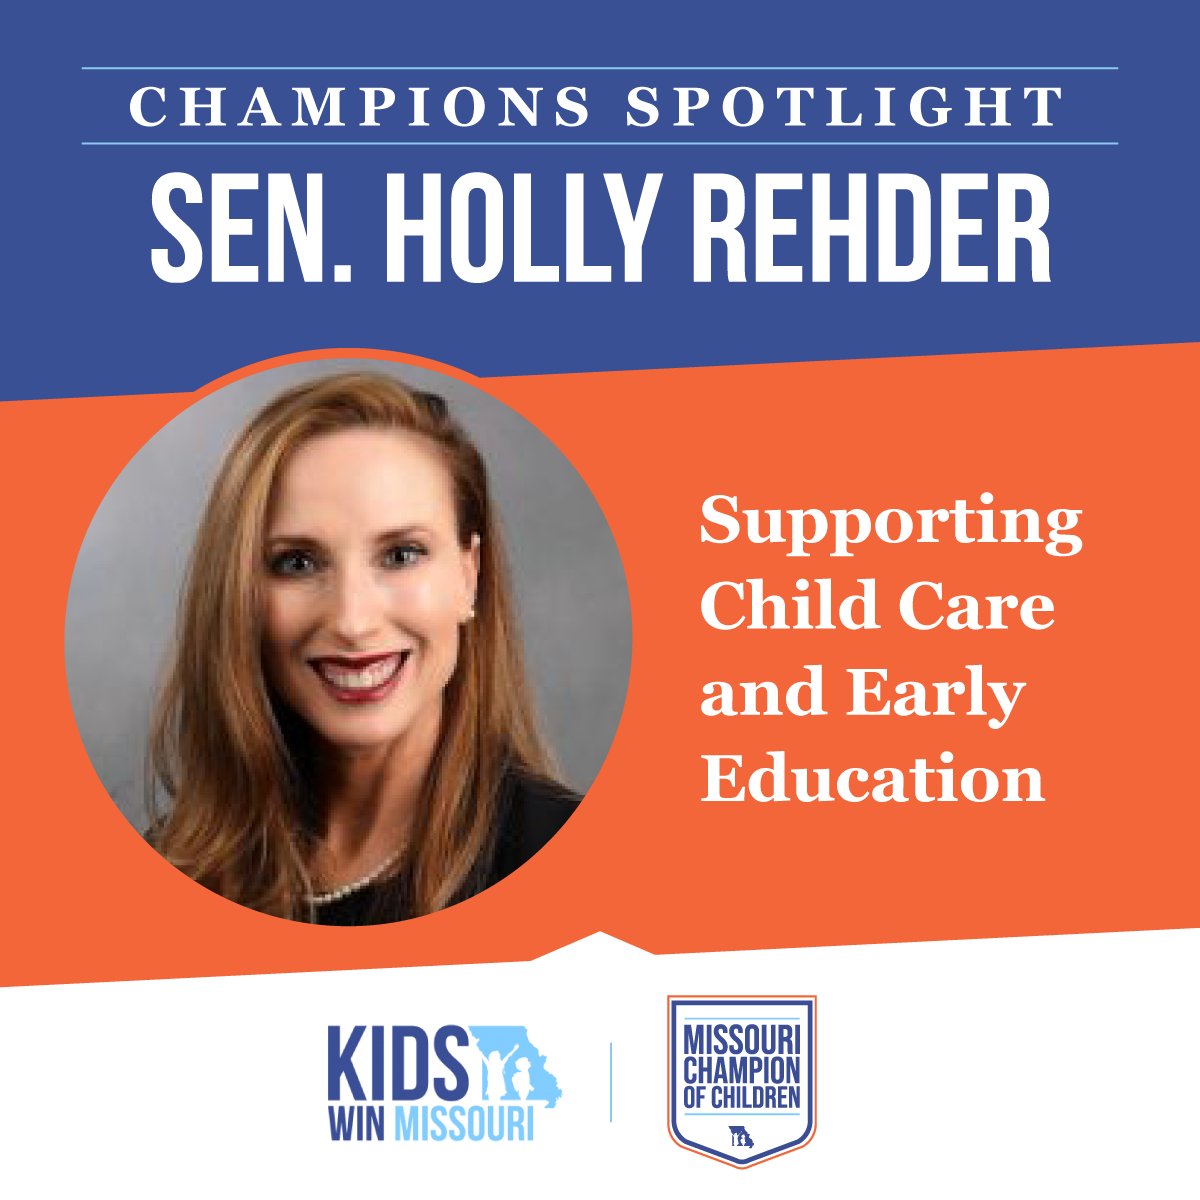 Champion Spotlight - Senator @hrehder has worked hard this session to ensure more working families can access child care and early education in every community. Thank you! #moleg #kidswin #MOChildChampion